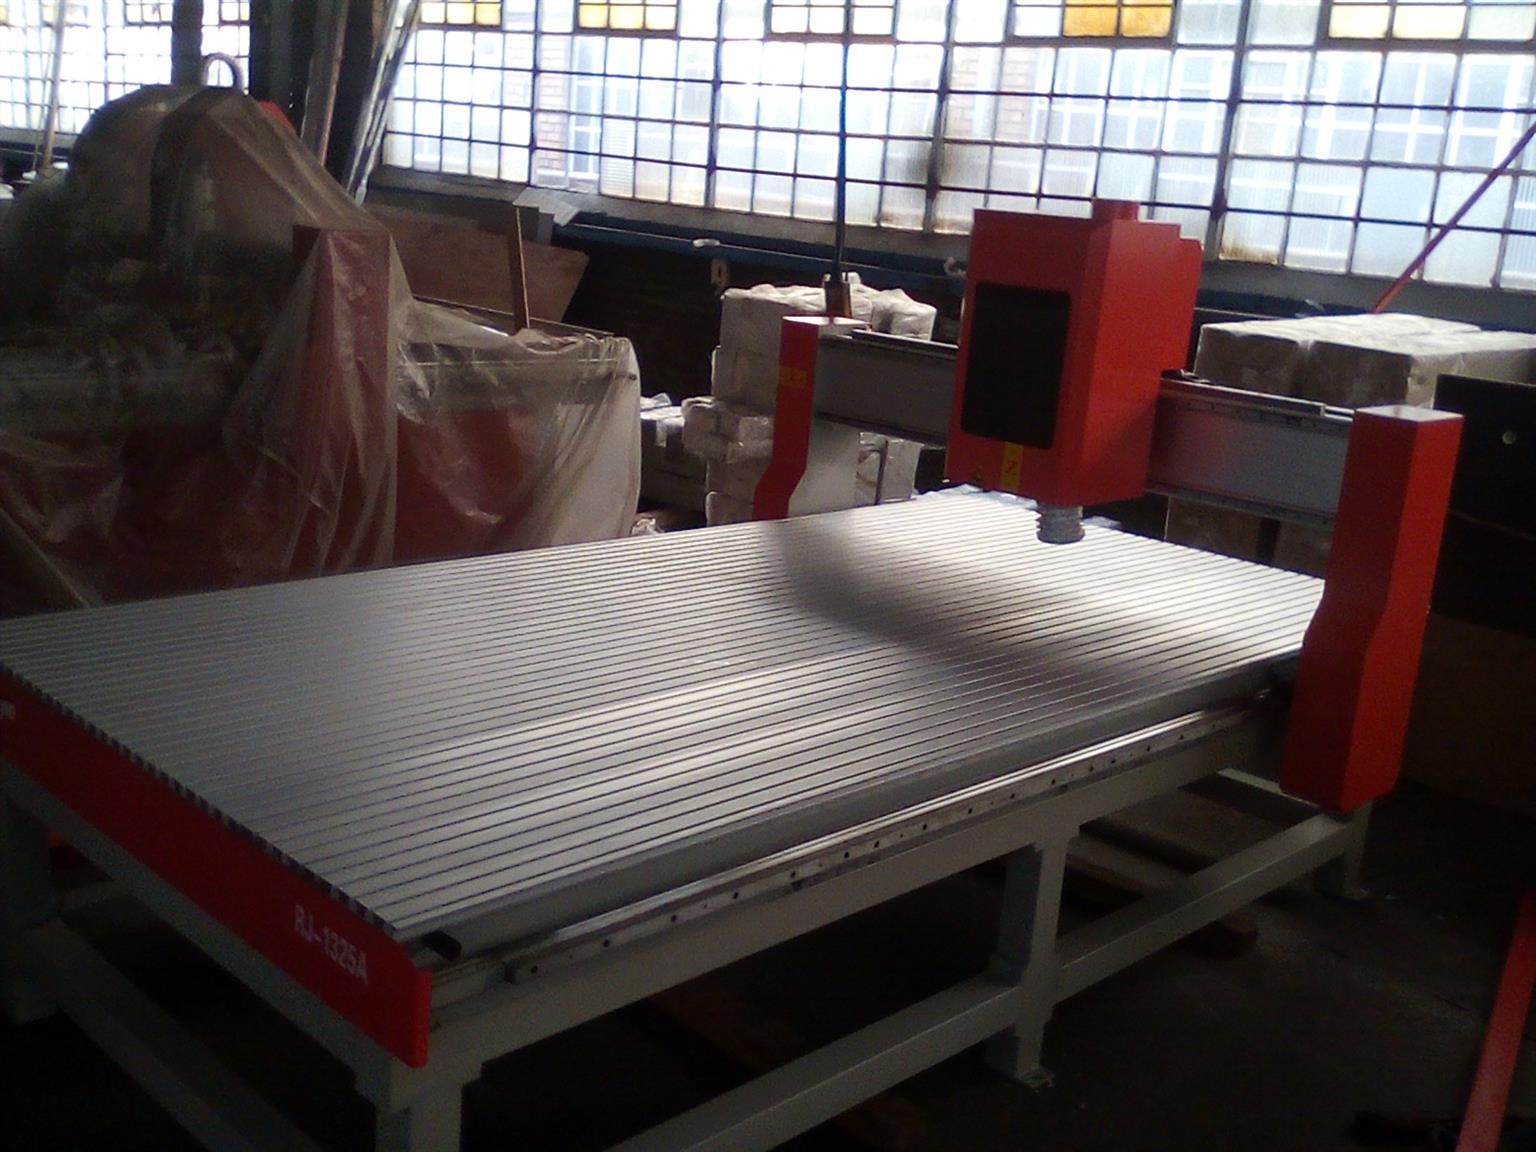 1300x2500mm cnc router for all engraving and cutting needs!!!